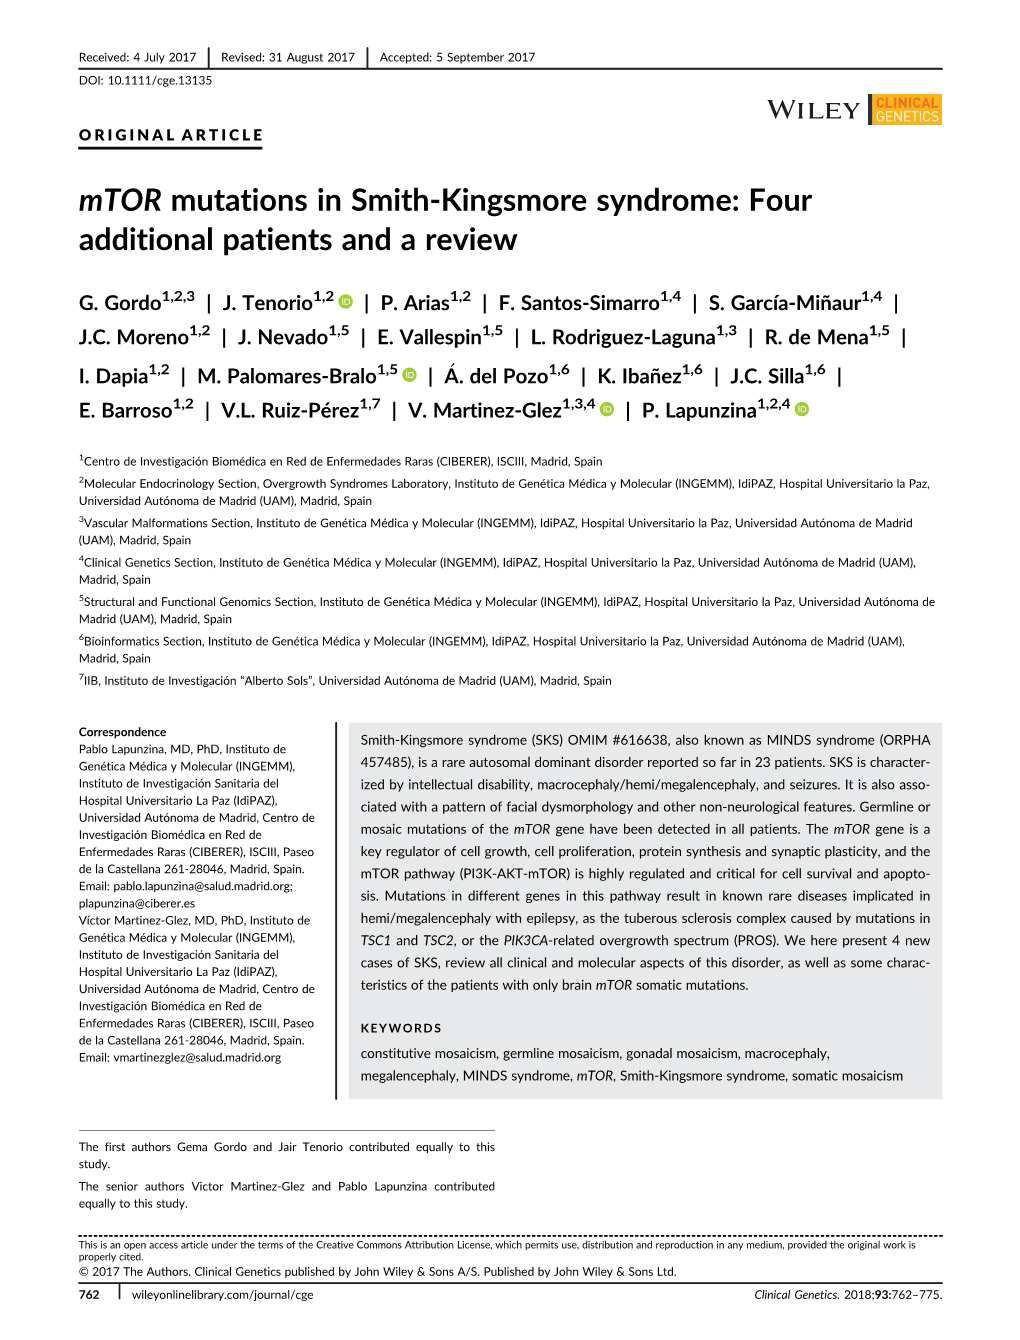 Mtor Mutations in Smith-Kingsmore Syndrome: Four Additional Patients and a Review